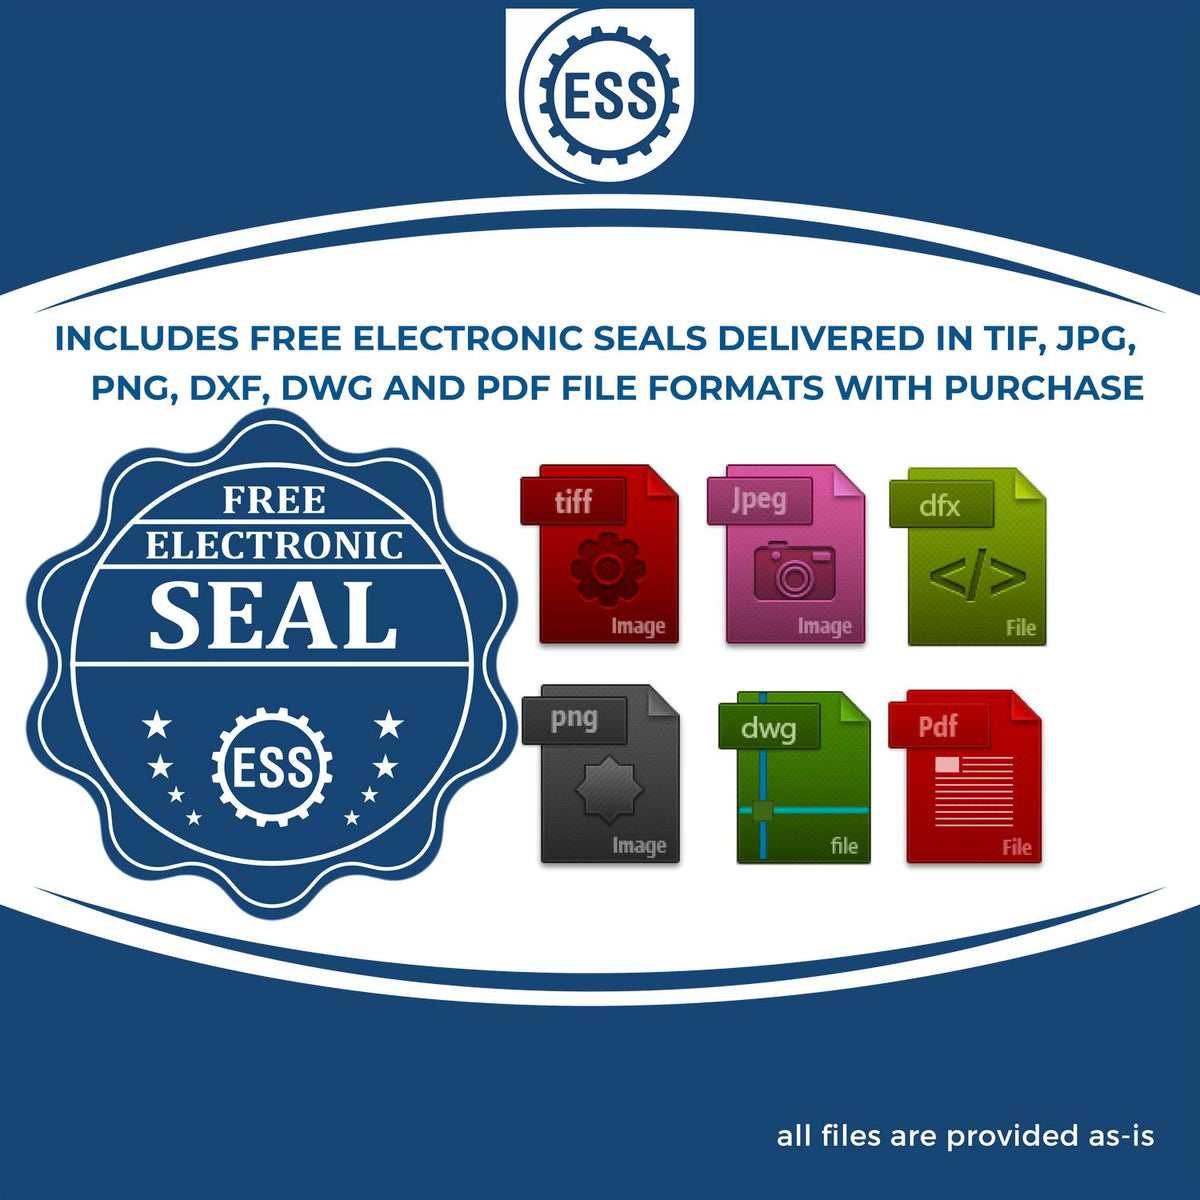 An infographic for the free electronic seal for the Long Reach Louisiana Land Surveyor Seal illustrating the different file type icons such as DXF, DWG, TIF, JPG and PNG.